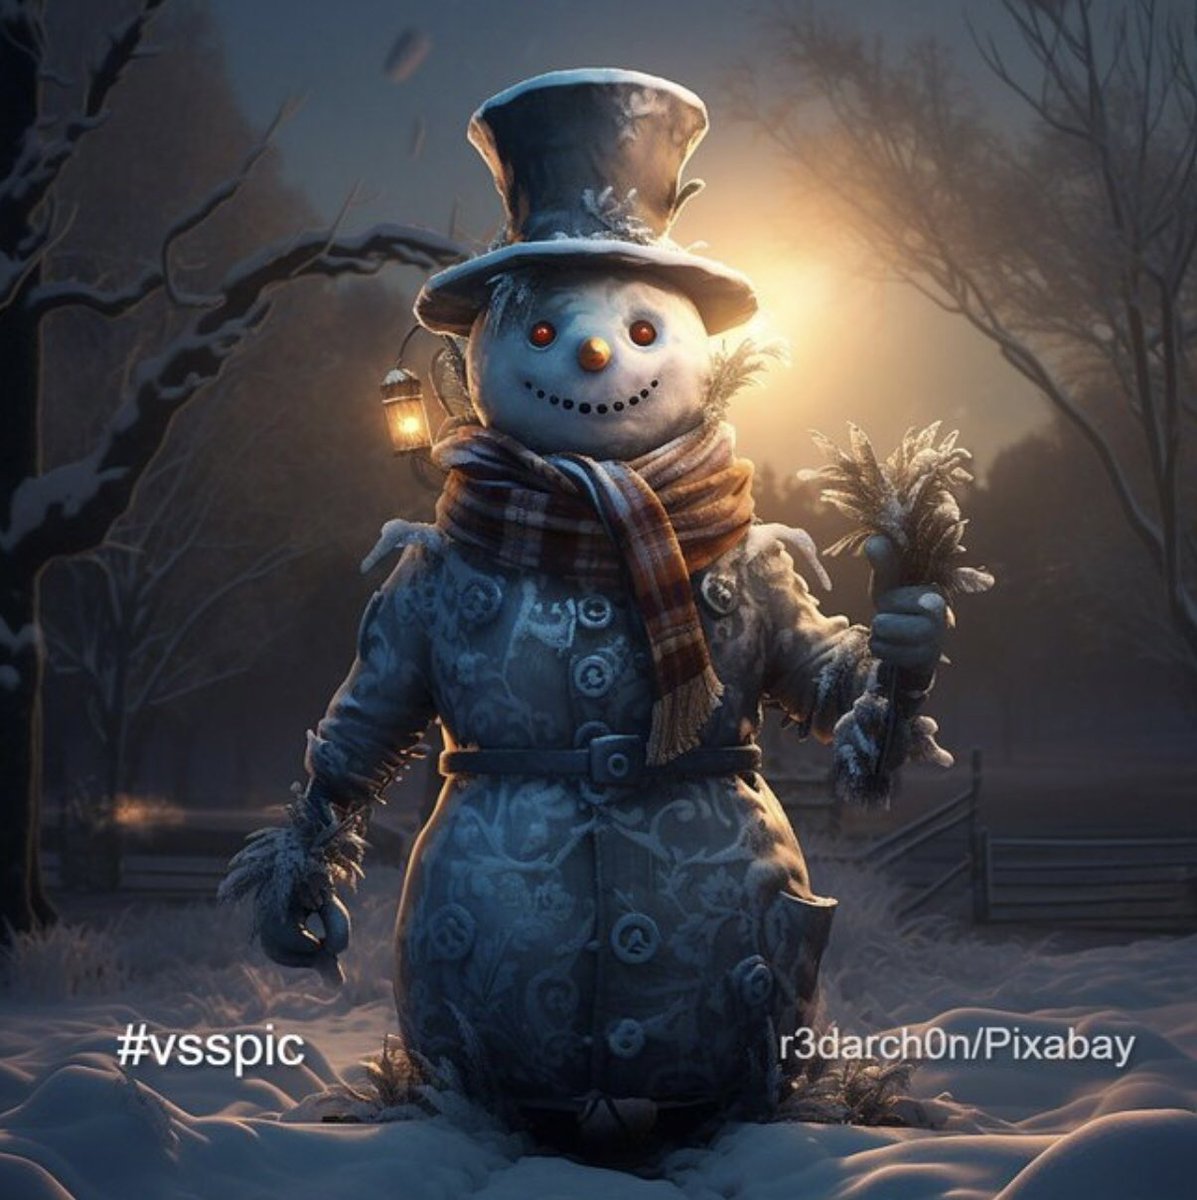 Snowman in a
Tailored suit,
Cranberry eyes aglow,
Elegance tapped
In winter's soft glow.
Gifts of wheat, a
Life gracefully displayed,
A frosty gentleman,
In the holiday charade...

#vsspic